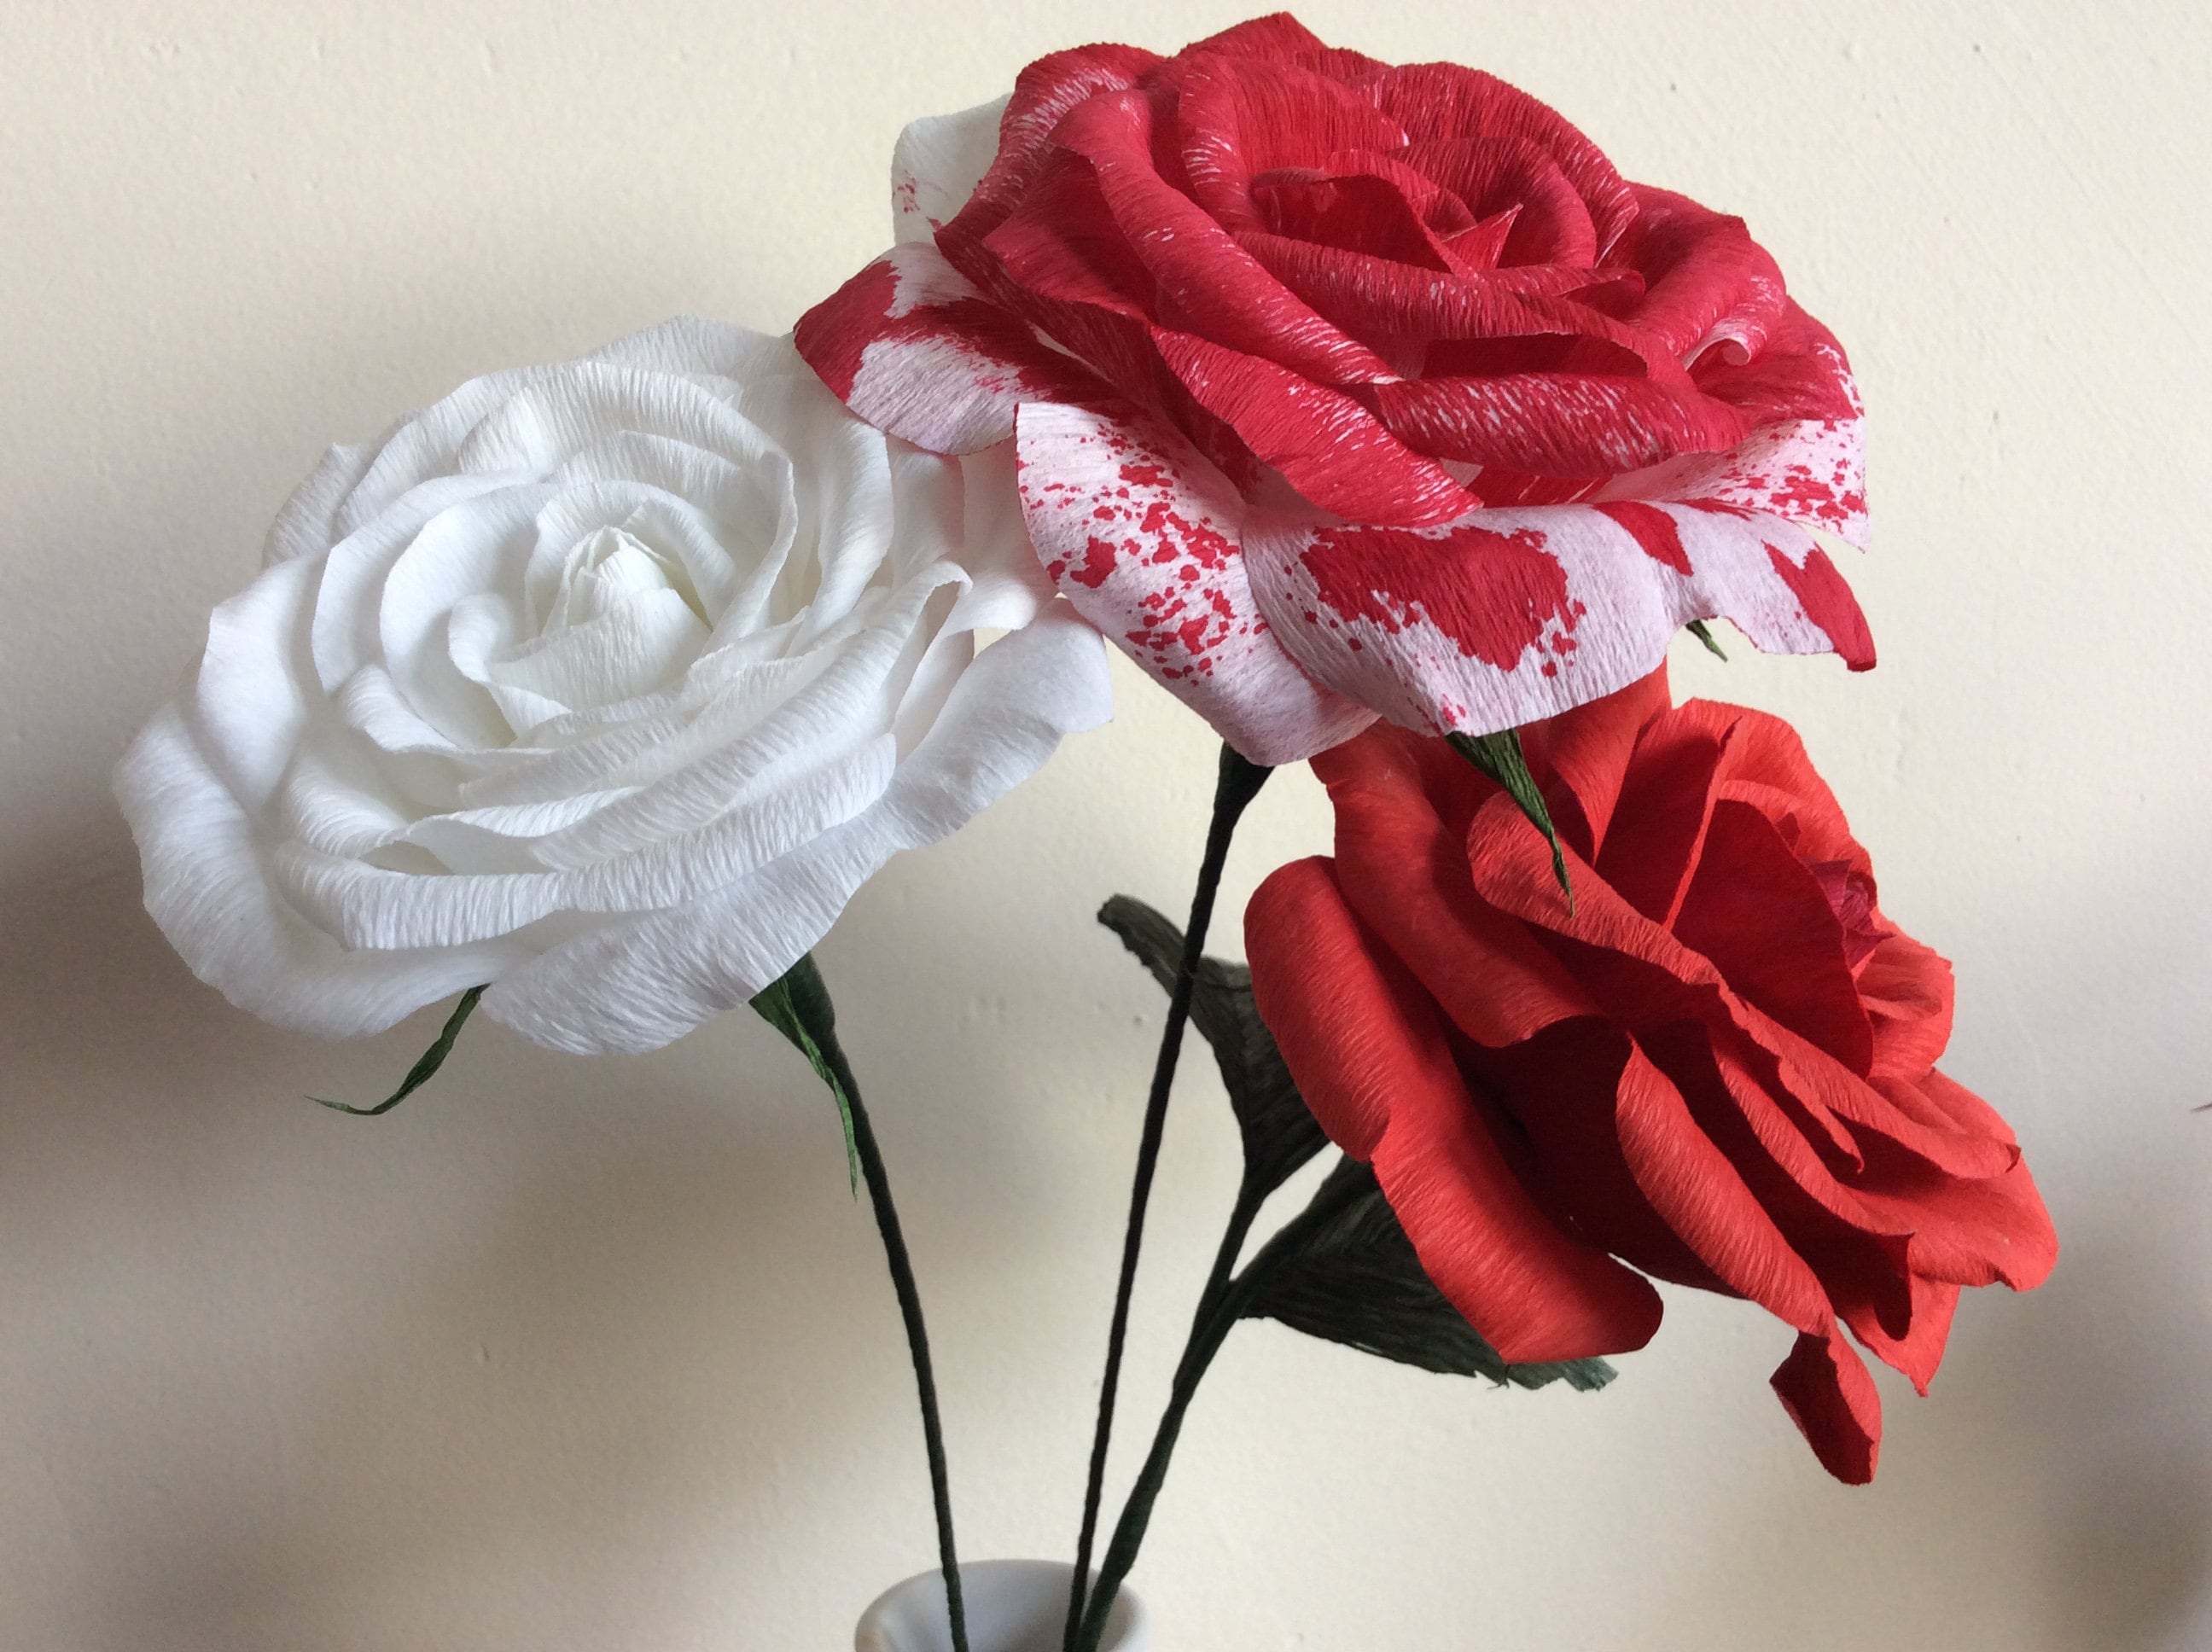 Painting White Roses Red in Wonderland Crepe Etsy